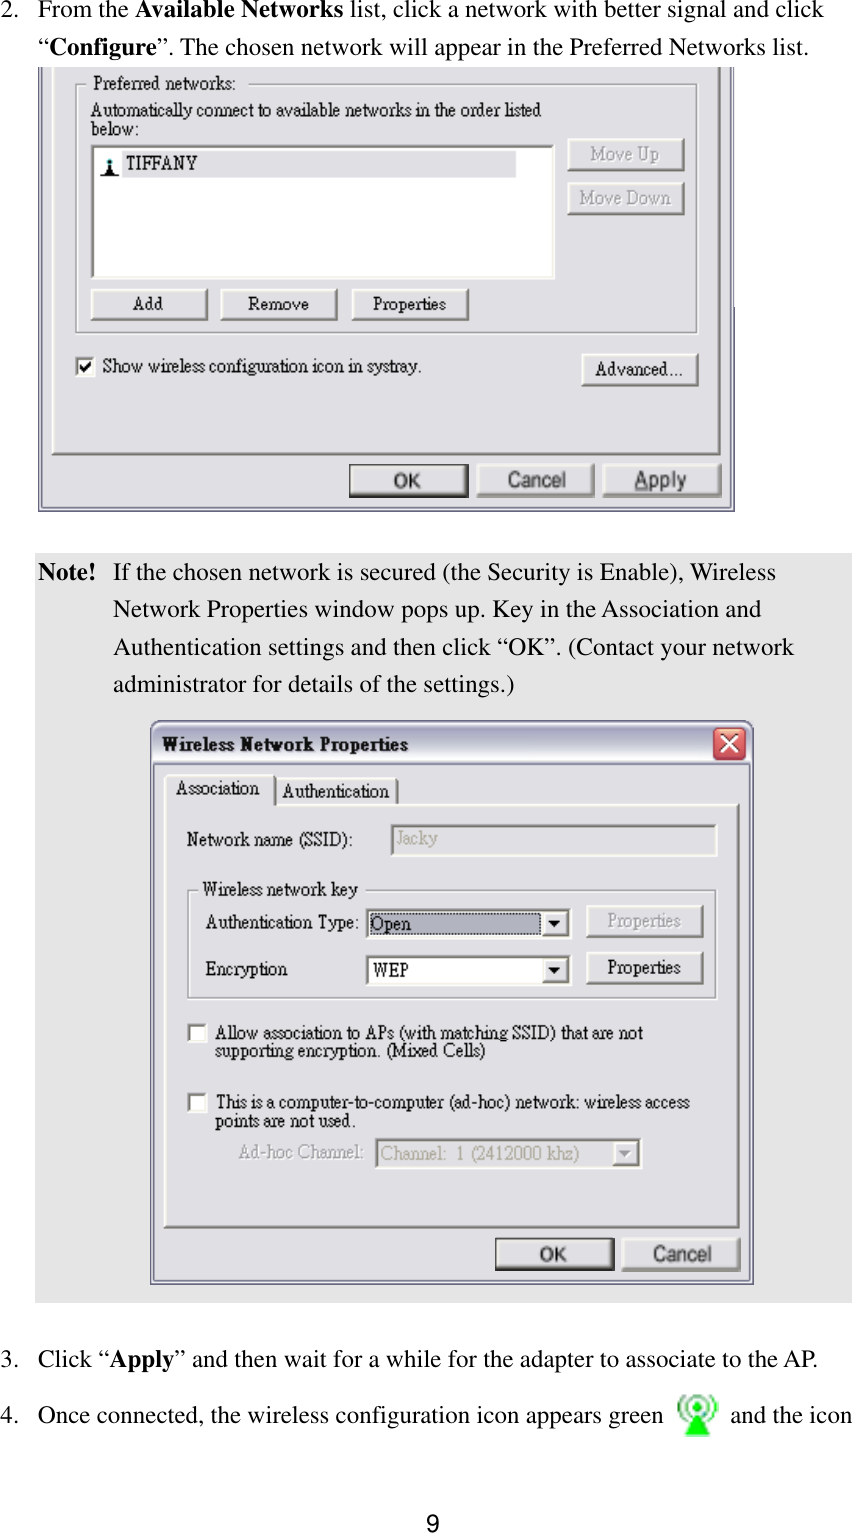  92. From the Available Networks list, click a network with better signal and click “Configure”. The chosen network will appear in the Preferred Networks list.    Note!  If the chosen network is secured (the Security is Enable), Wireless Network Properties window pops up. Key in the Association and Authentication settings and then click “OK”. (Contact your network administrator for details of the settings.)    3. Click “Apply” and then wait for a while for the adapter to associate to the AP. 4.  Once connected, the wireless configuration icon appears green    and the icon 